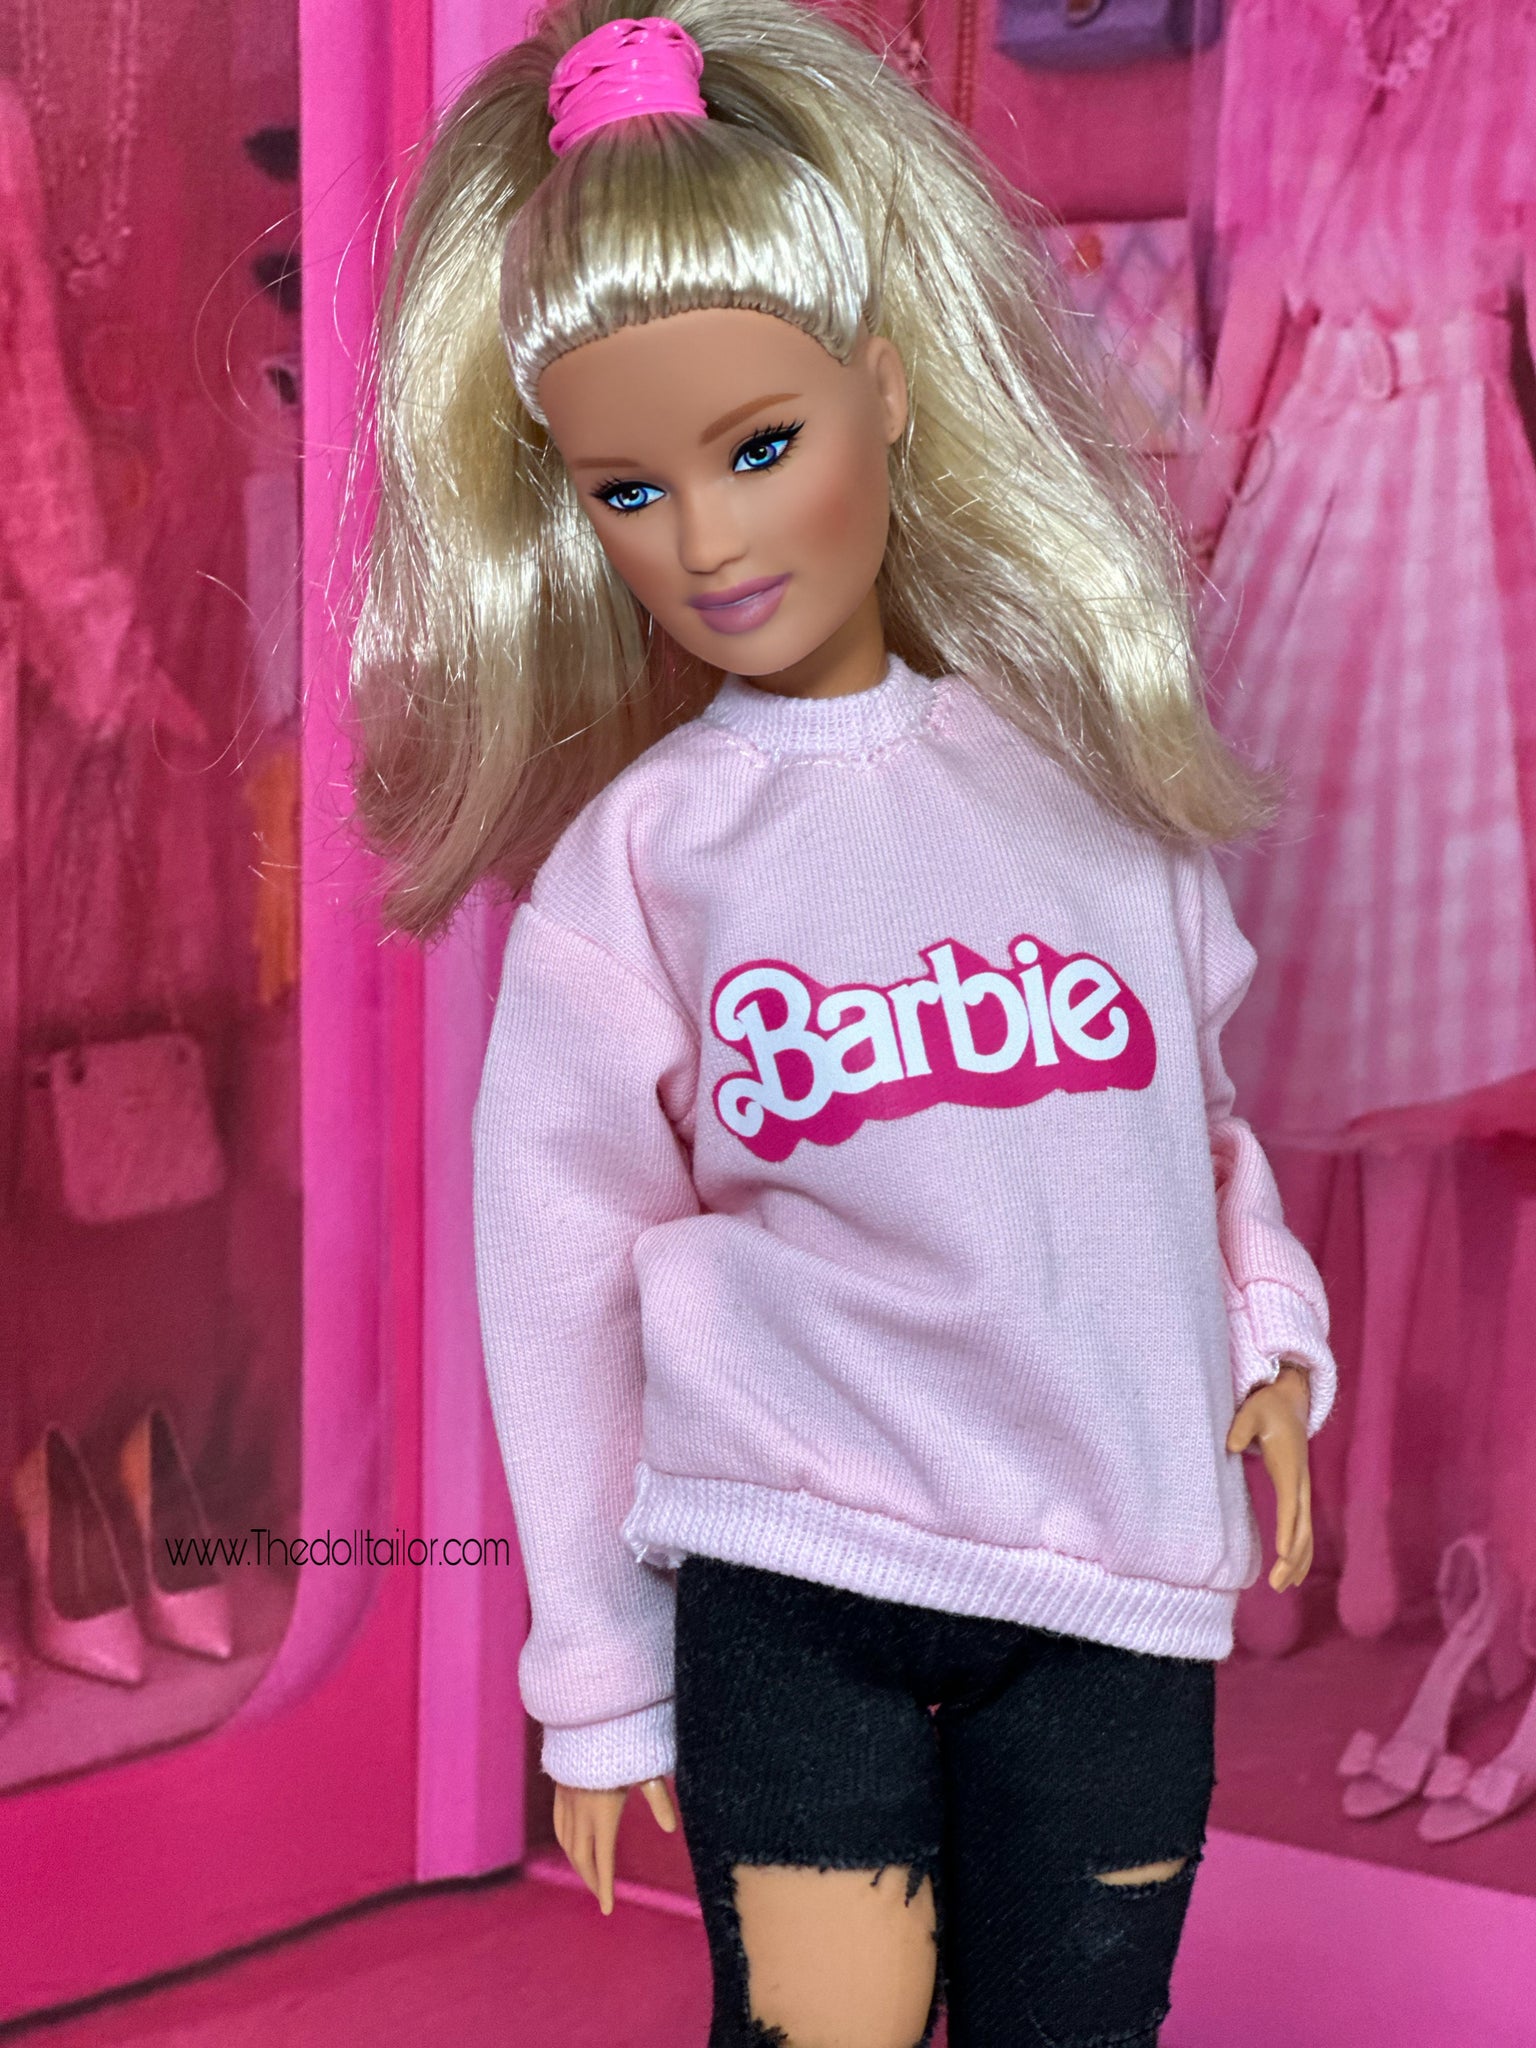 Pink sweater for Barbie doll with Logo – The Doll Tailor